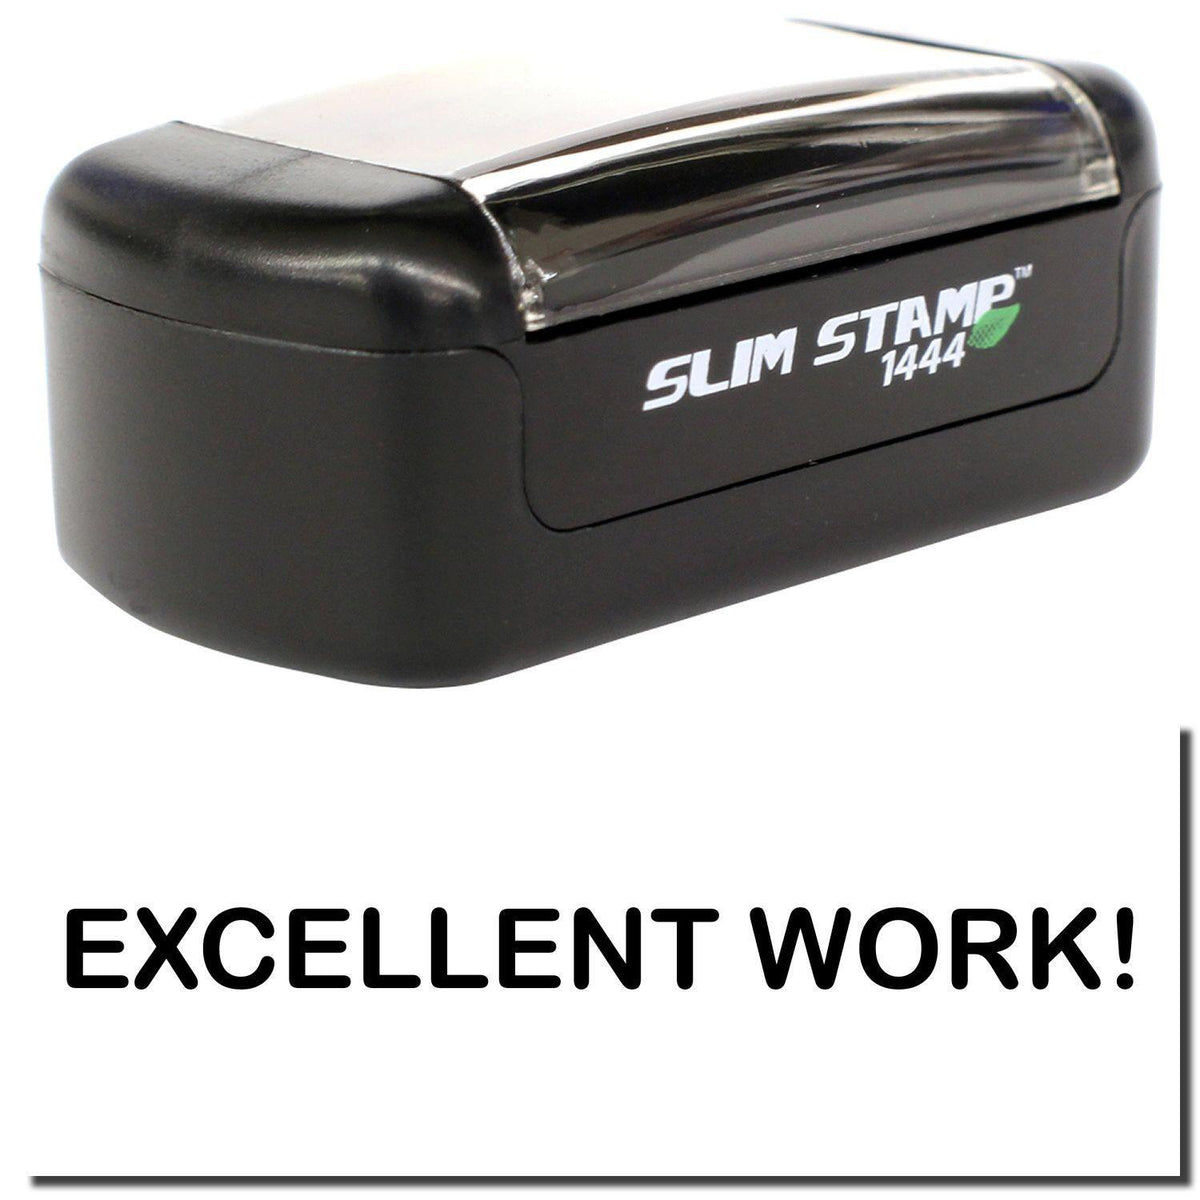 A stock office pre-inked stamp with a stamped image showing how the text &quot;EXCELLENT WORK!&quot; is displayed after stamping.